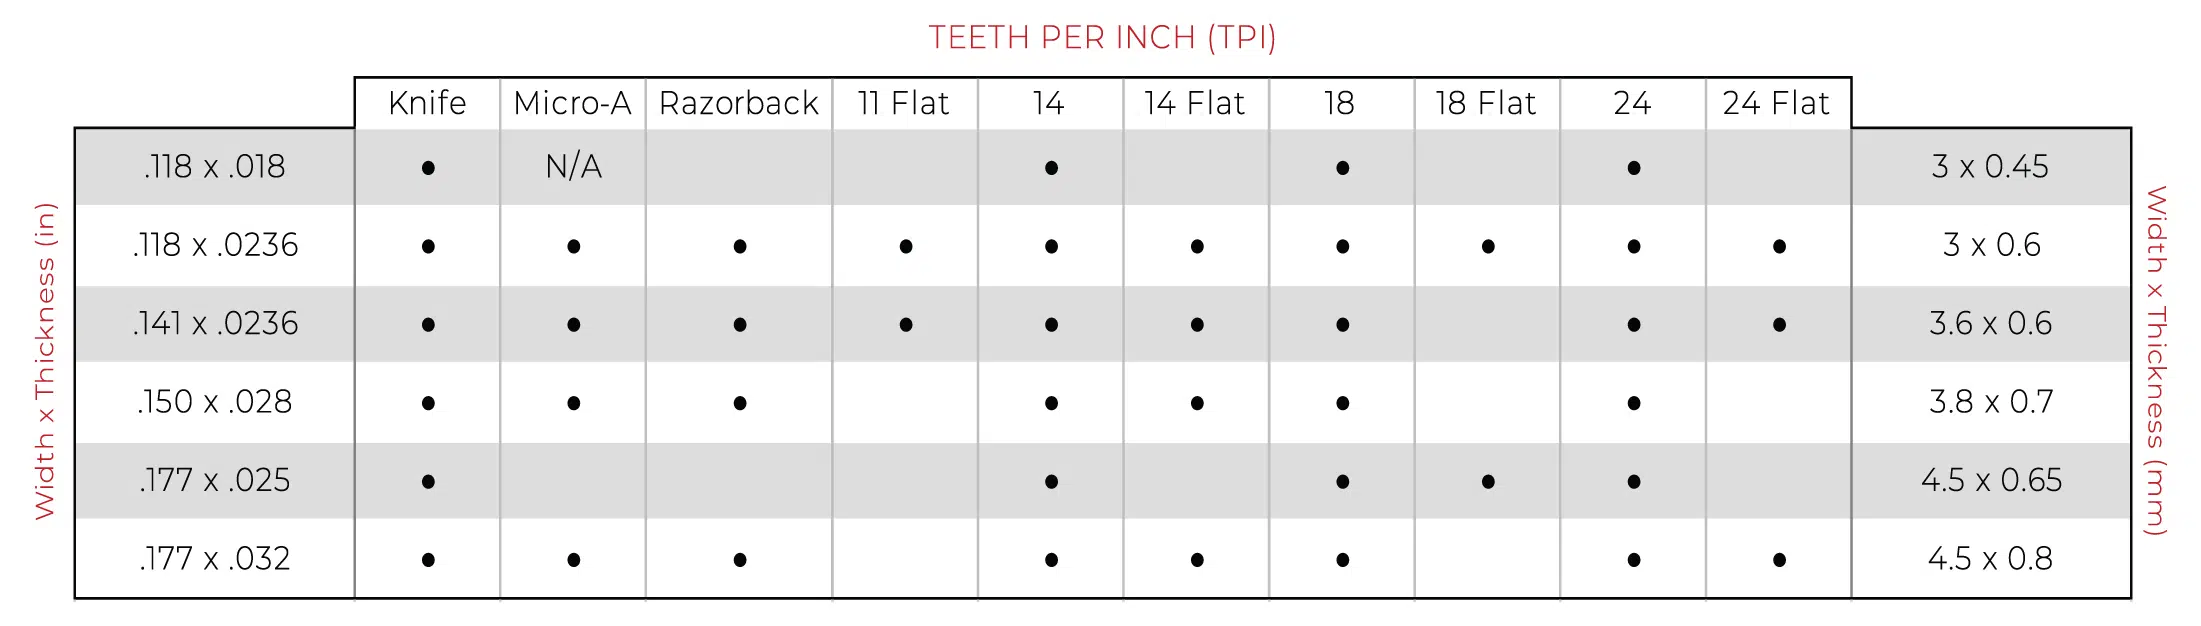 Size chart for CNC blades.